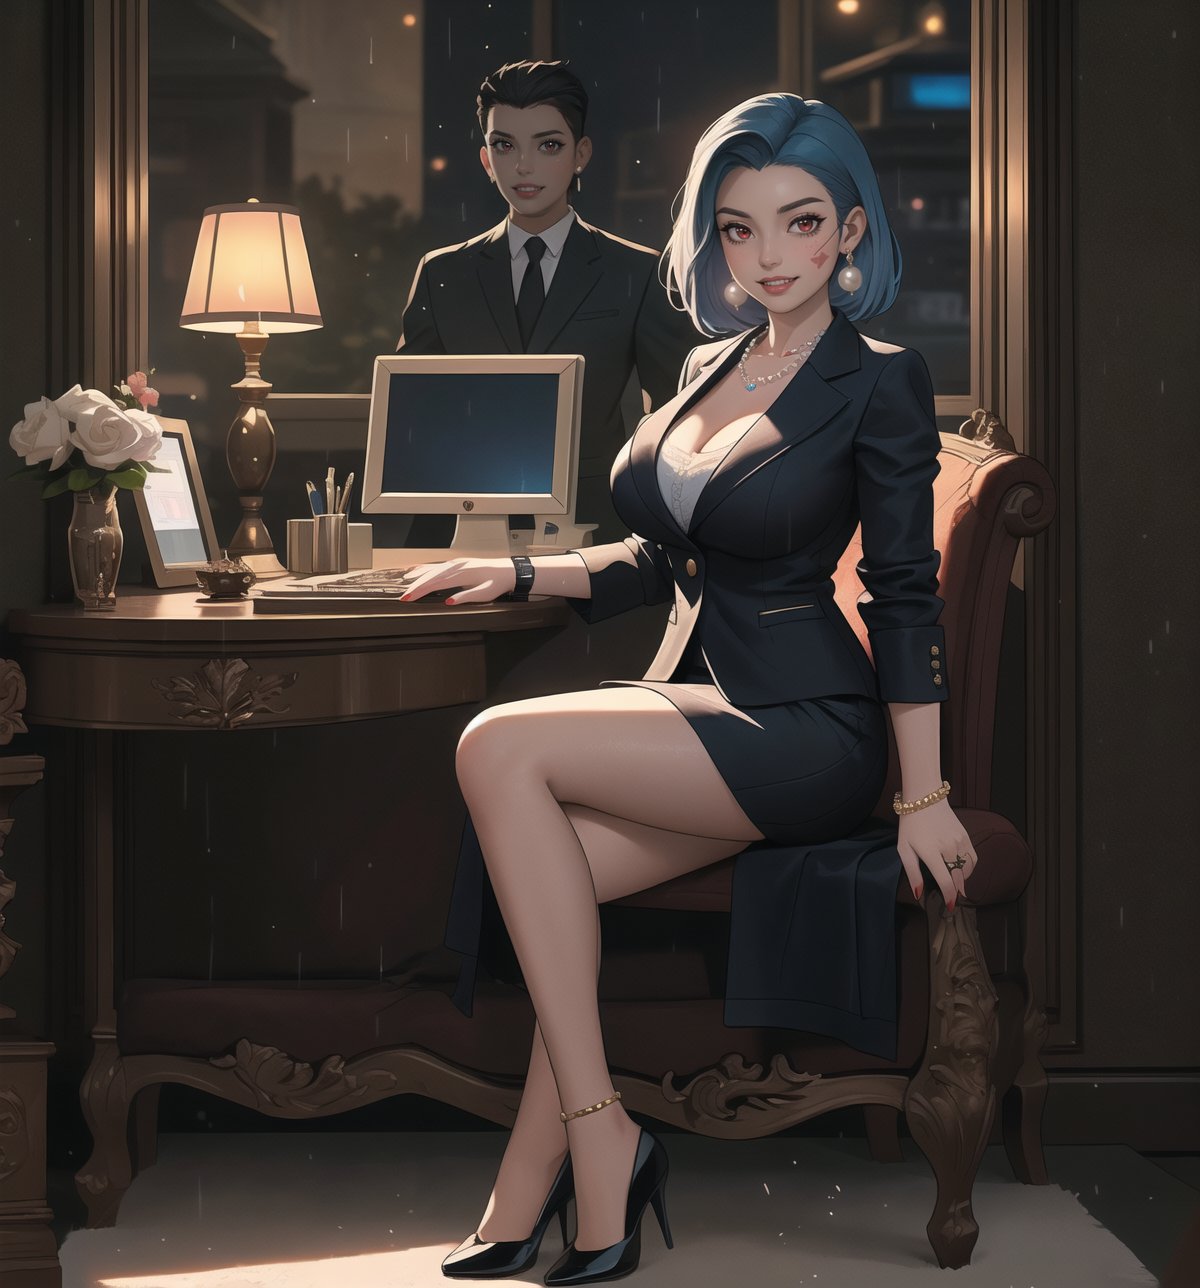 An ultra-detailed 4K fantasy-adventure masterpiece, rendered in ultra-high resolution with stunning graphical detail. | Sophia, a 35-year-old woman, is dressed in a lawyer's suit, consisting of a white blouse, black skirt and black jacket. She also wears a pearl necklace, pearl earrings, a gold bracelet, and a gold wristwatch. Her short blue hair is slicked back in a sleek, modern cut. Her red eyes are looking straight at the viewer, while she ((smiles and shows her teeth)), wearing bright red lipstick and war paint on her face. It is located in a law office, with wooden structures, a window showing the city at night, raining heavily, metal structures and a computer on the table. The light from the table lamp illuminates the room, creating a professional and focused atmosphere. | The image highlights Sophia's sensual and strong figure and the elements of the law office, creating an atmosphere of mystery and adventure. Dramatic lighting creates deep shadows and highlights details in the scene. | Soft, moody lighting effects create a relaxing and mysterious atmosphere, while rough, detailed textures on structures and decor add realism to the image. | A sensual and terrifying scene of a beautiful woman in a law office at night, fusing fantasy and adventure art elements. | (((The image reveals a full-body shot as Sophia assumes a sensual pose, engagingly leaning against a structure within the scene in an exciting manner. She takes on a sensual pose as she interacts, boldly leaning on a structure, leaning back and boldly throwing herself onto the structure, reclining back in an exhilarating way.))). | ((((full-body shot)))), ((perfect pose)), ((perfect limbs, perfect fingers, better hands, perfect hands))++, ((perfect legs, perfect feet))++, ((huge breasts)), ((perfect design)), ((perfect composition)), ((very detailed scene, very detailed background, perfect layout, correct imperfections)), Enhance++, Ultra details++, More Detail++